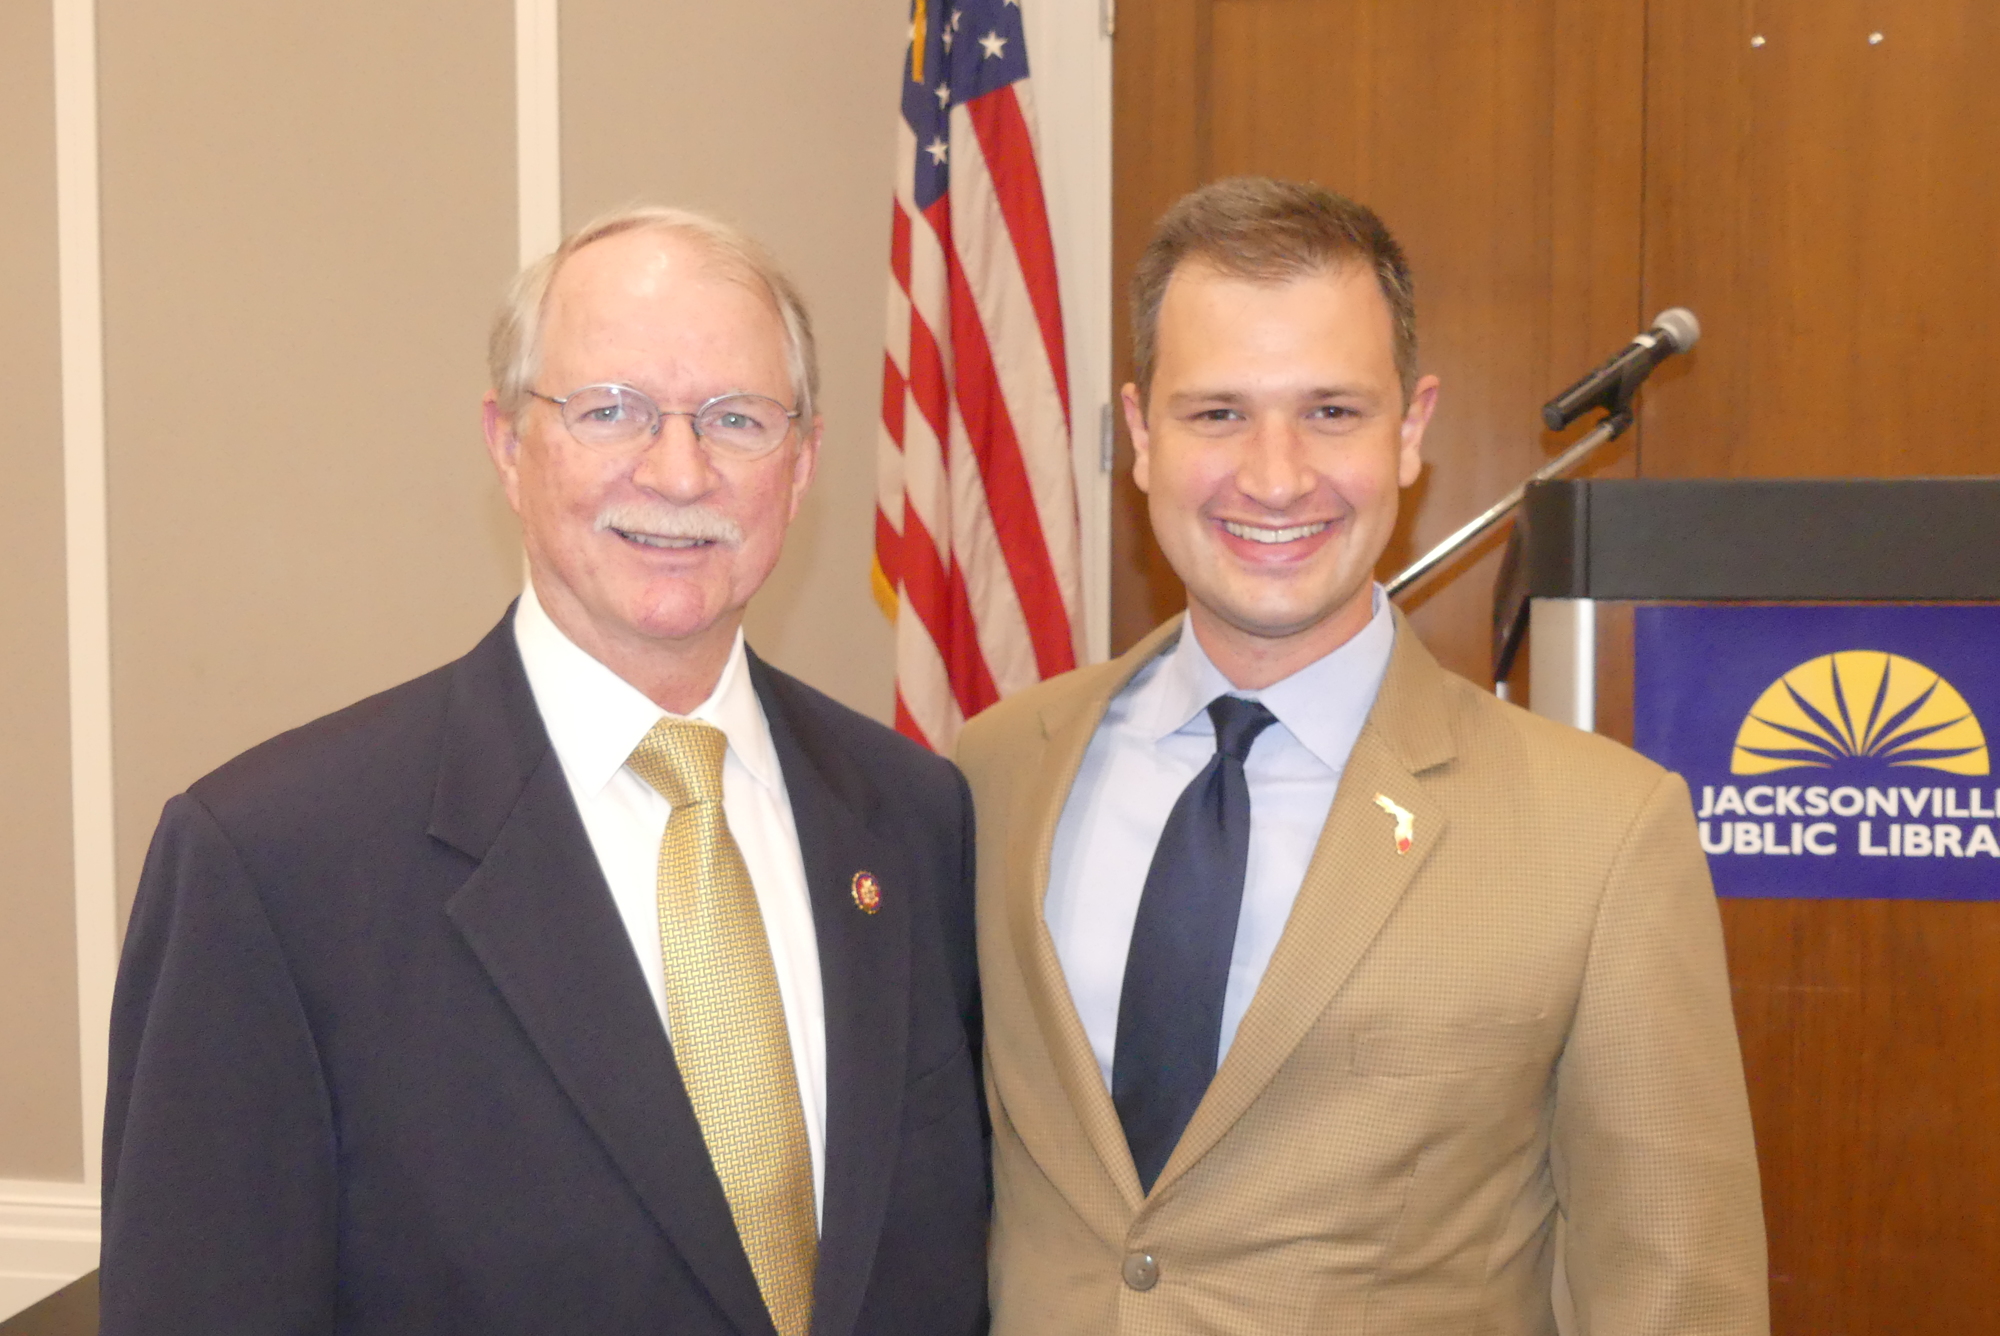 U.S. Rep. John Rutherford, left, and Rogers Towers business attorney Adam Brandon, president of the Jacksonville Lawyers Chapter of the Federalist Society.